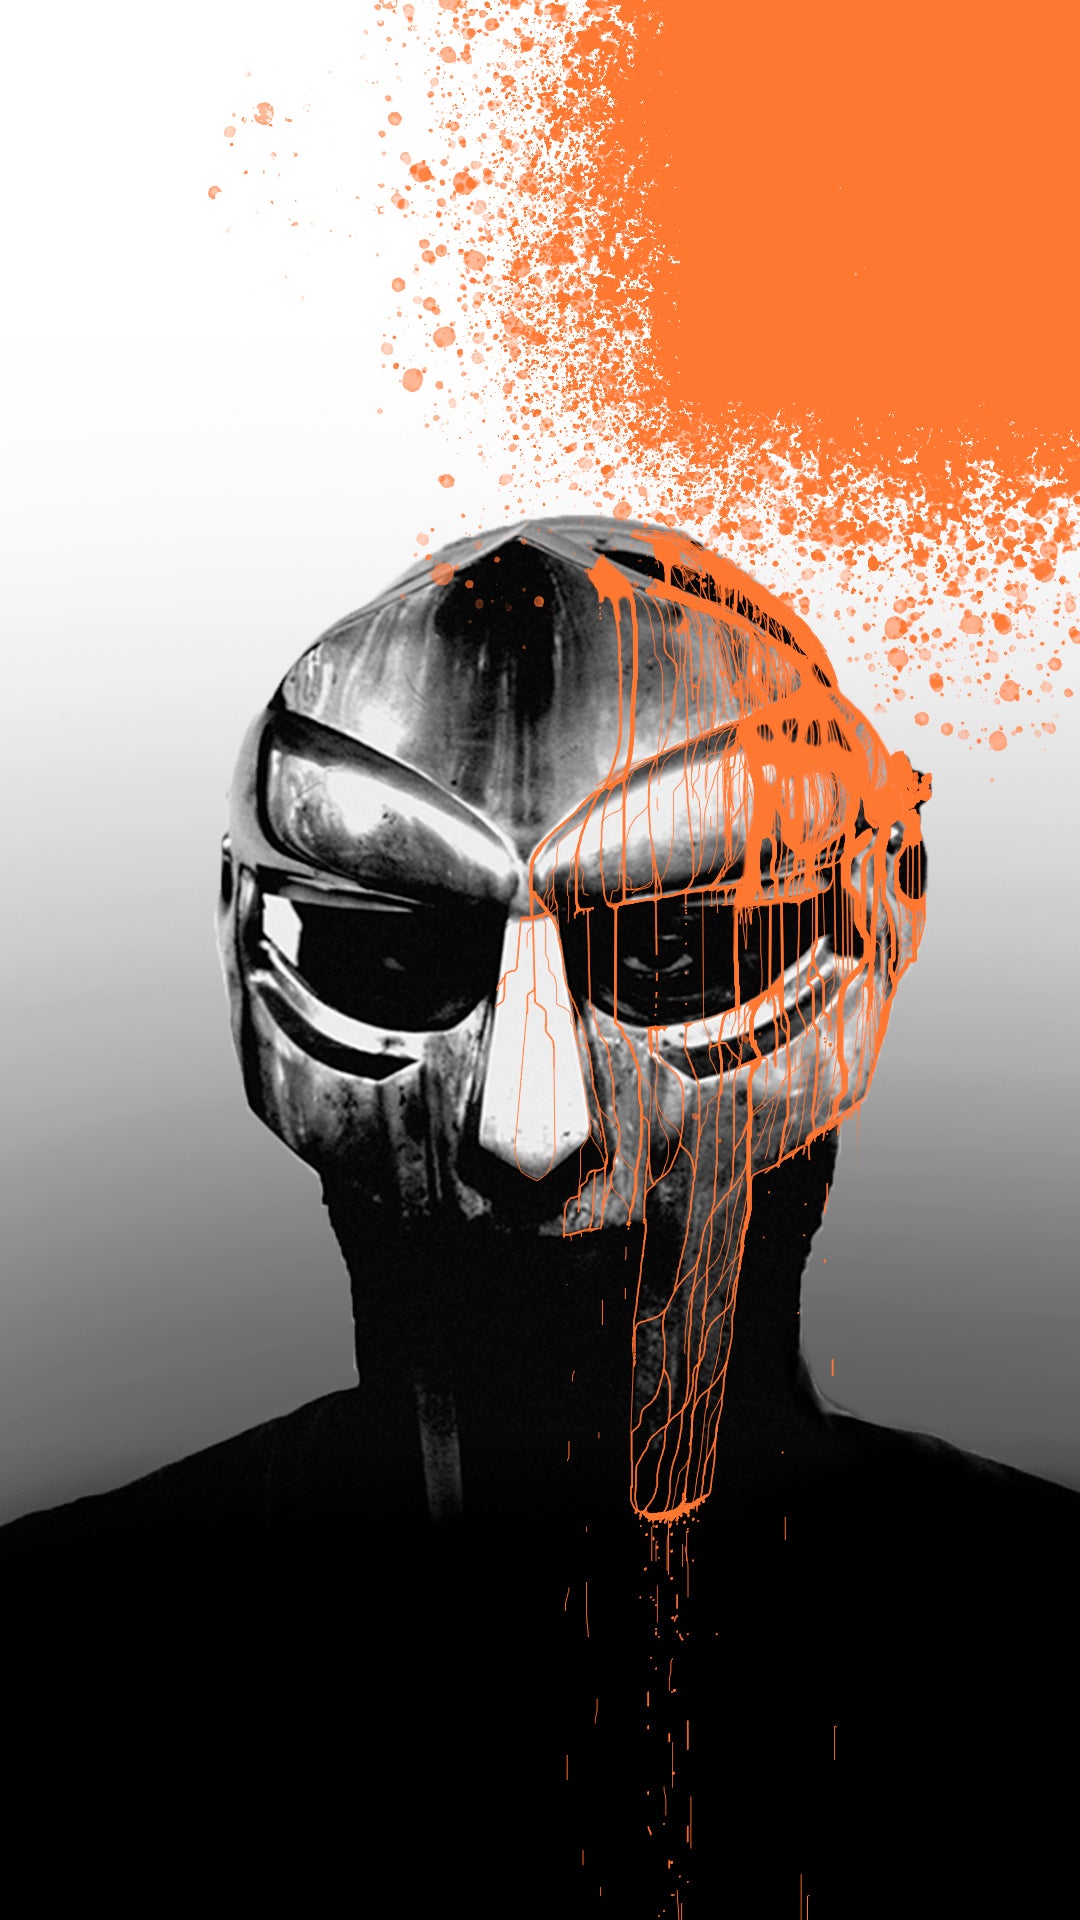 so, i was having a hard time finding a madvillainy wallpaper that i actually liked so i made one for myself and thought someone around here would want it. here it is